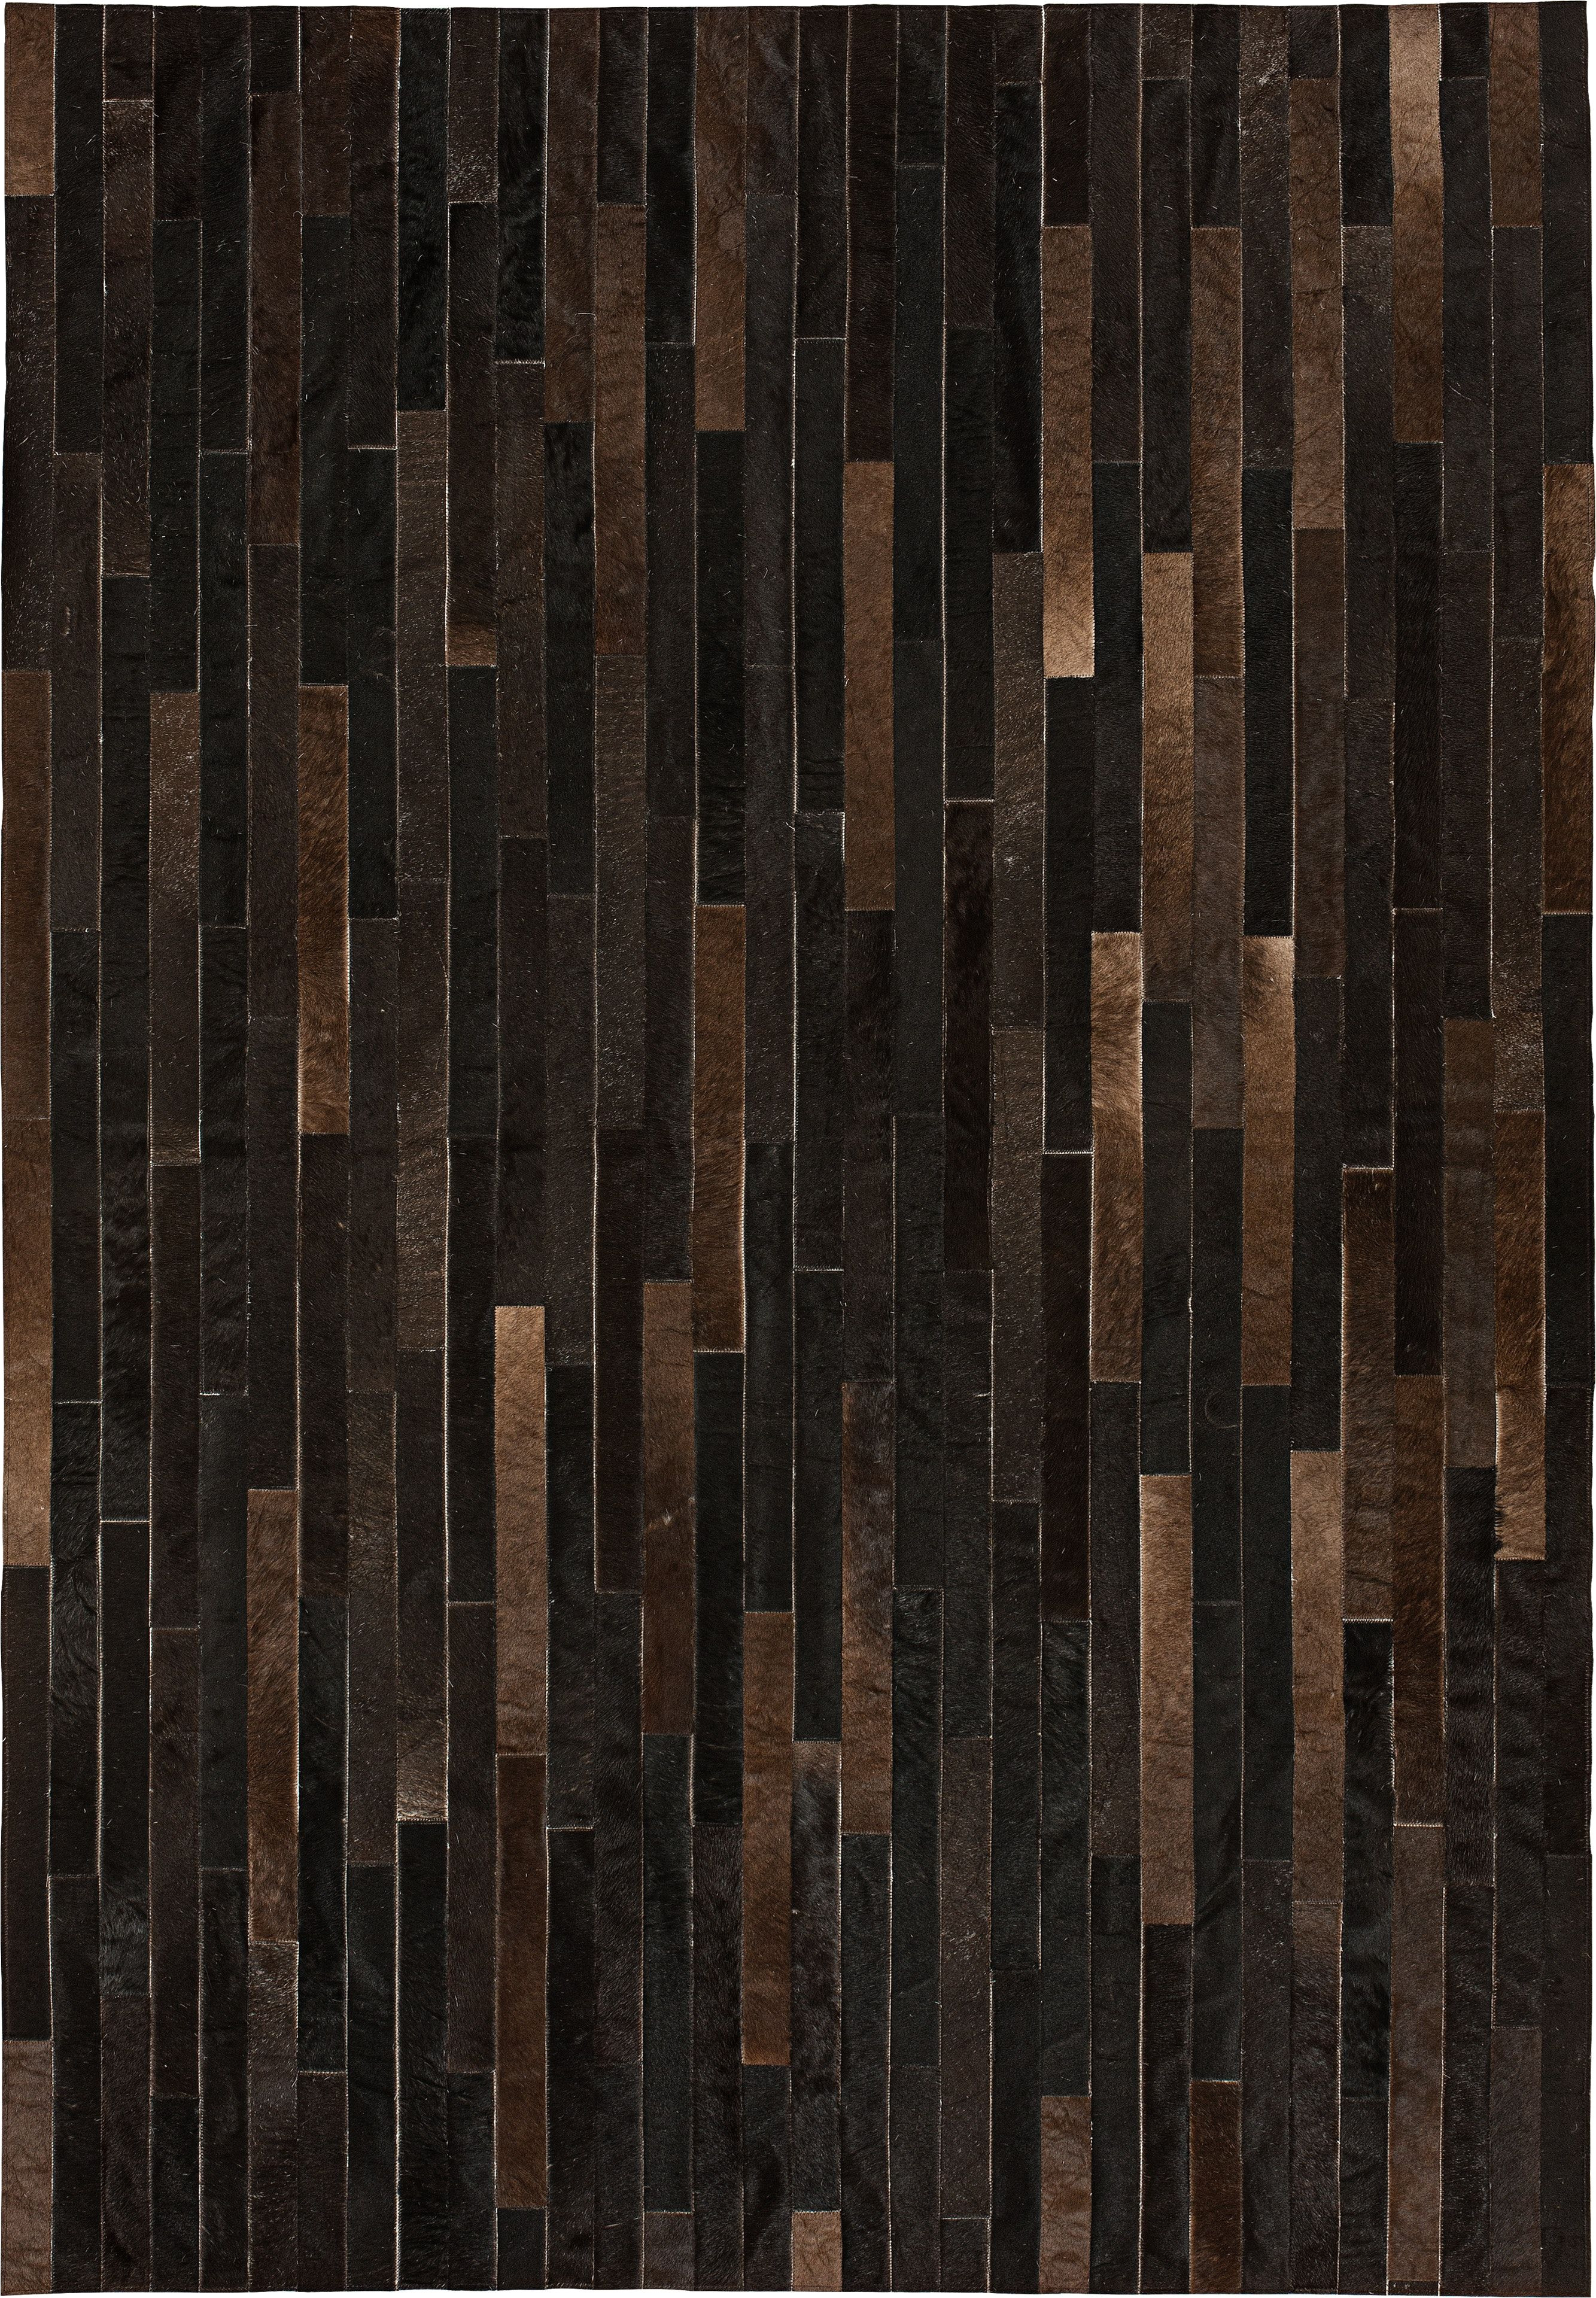 buy caminito patchwork cowhide rug umber by pampas leather made to order designer rugs from dering hall s collection of contemporary geometric stripe